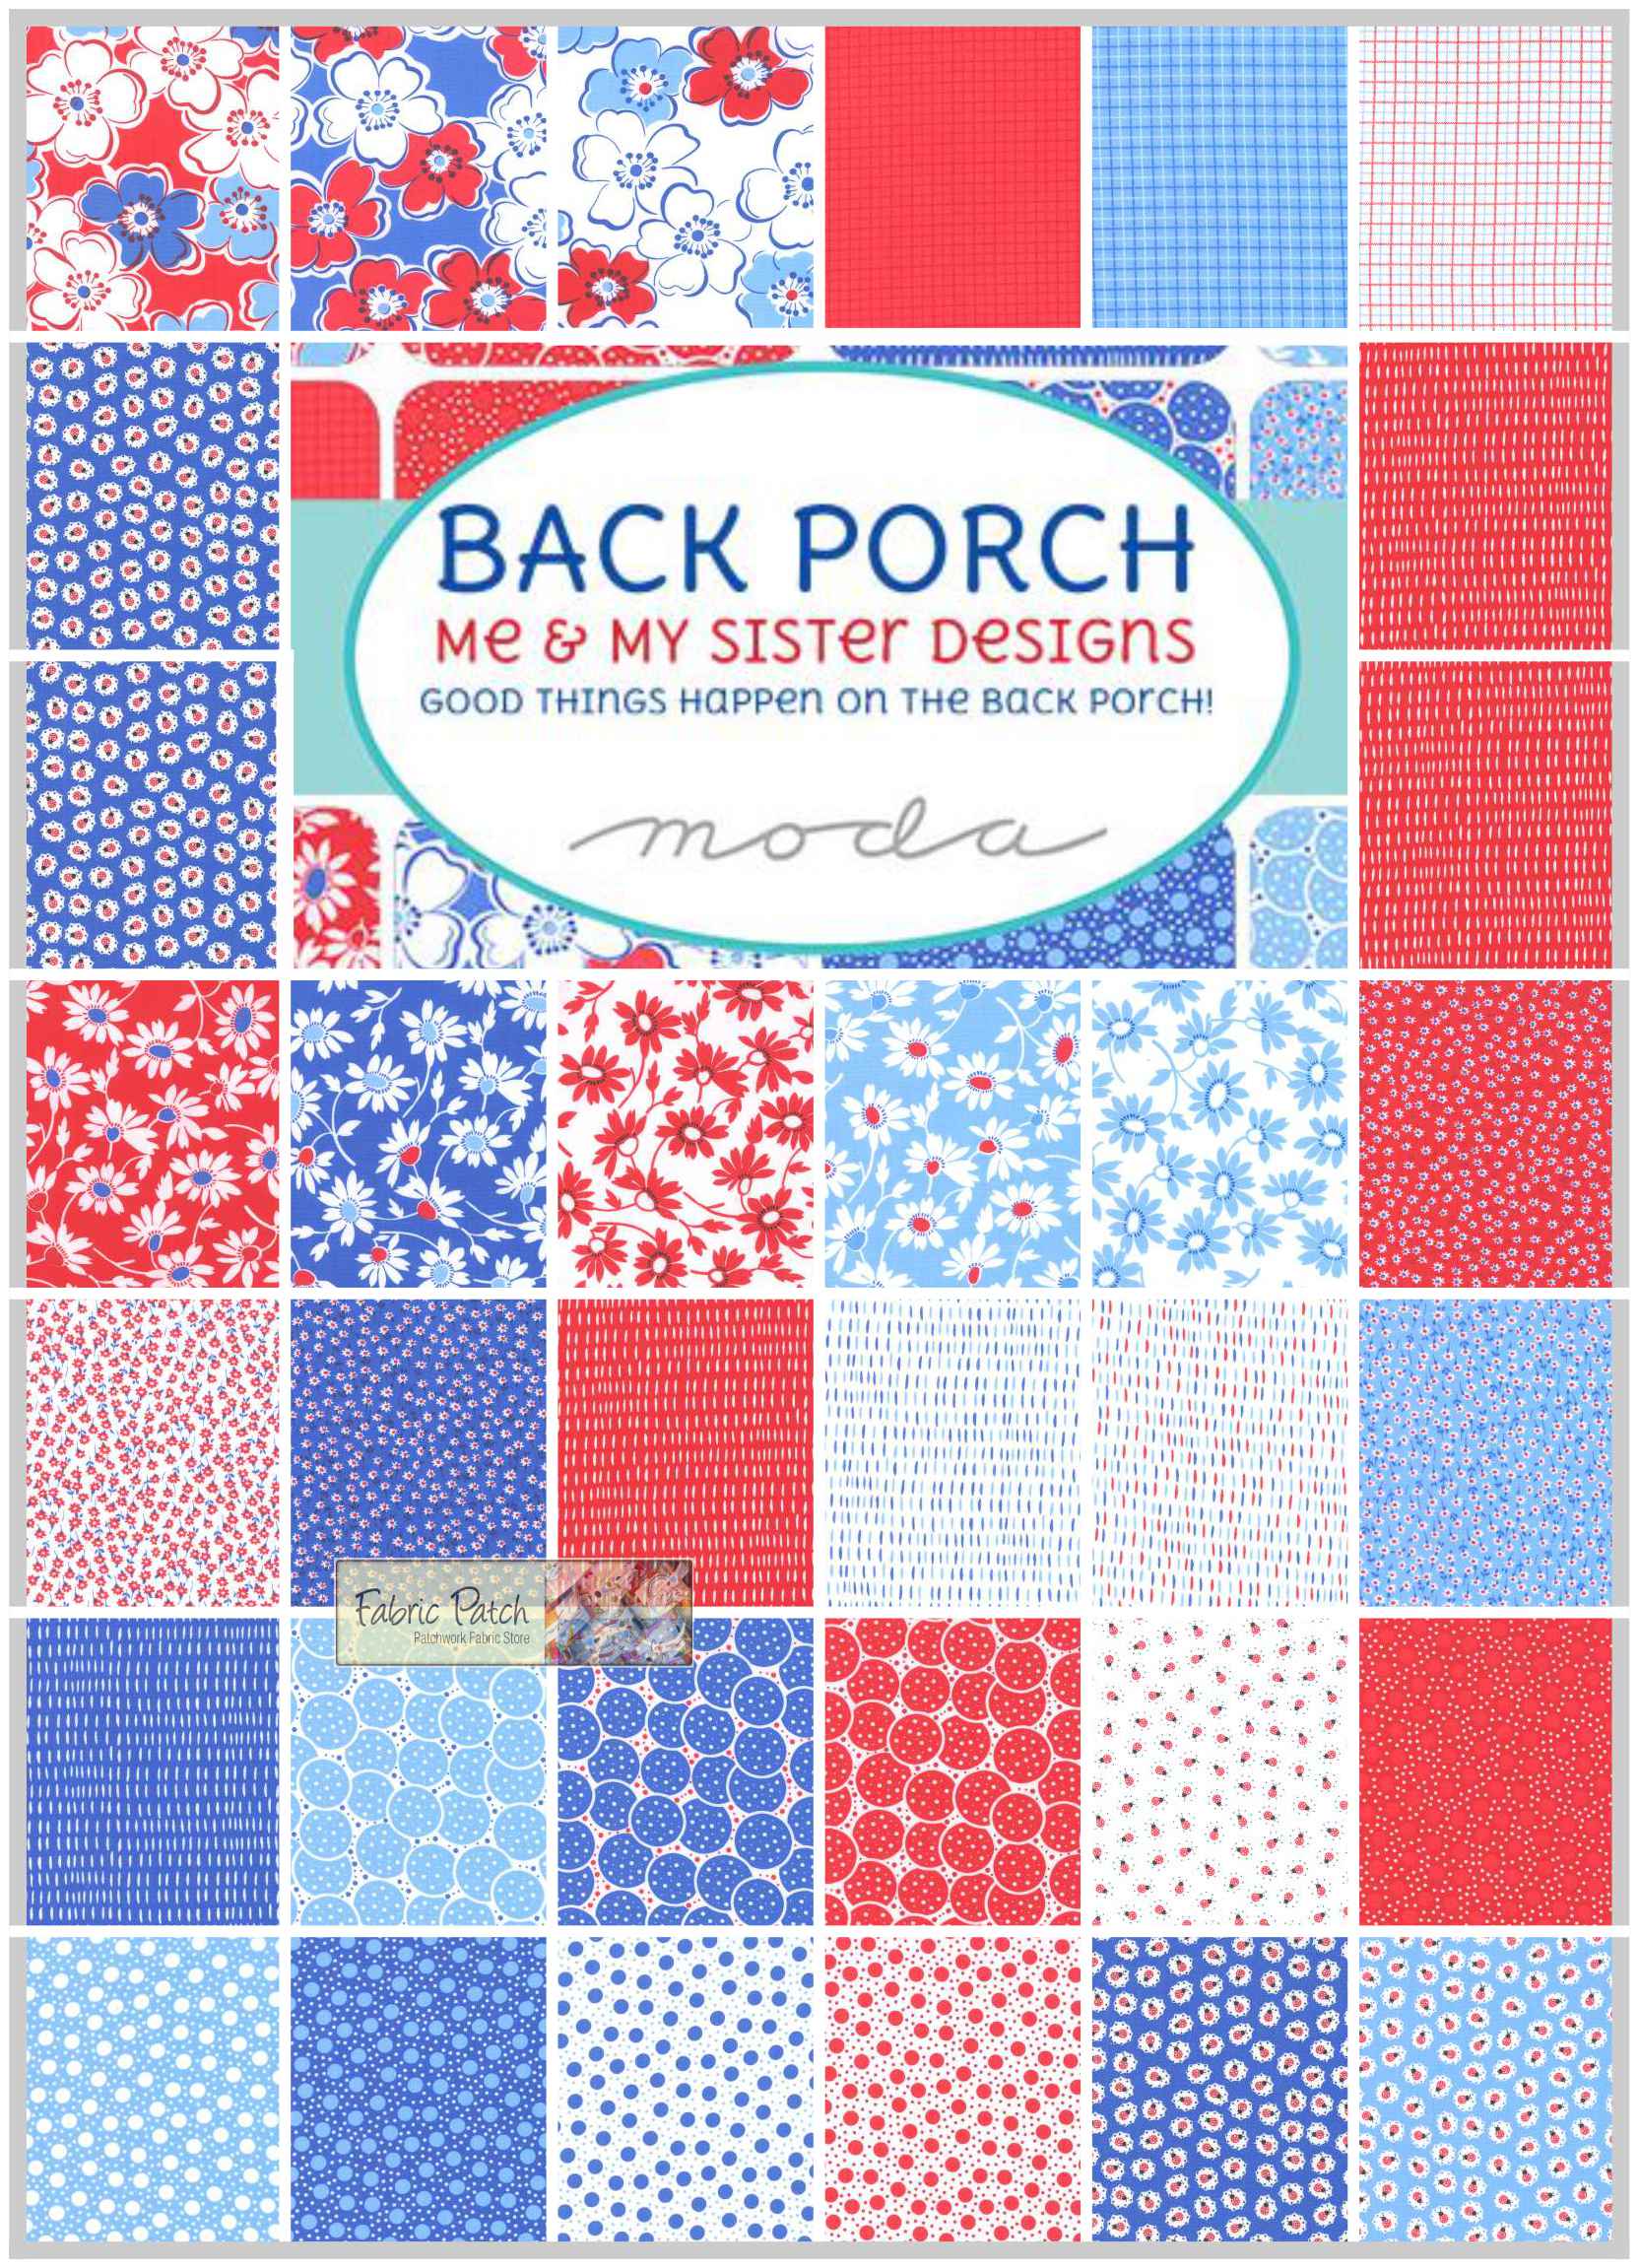 Back Porch Layer Cakes by Me & My Sister for Moda Fabrics.Patchwork & quilting fabric